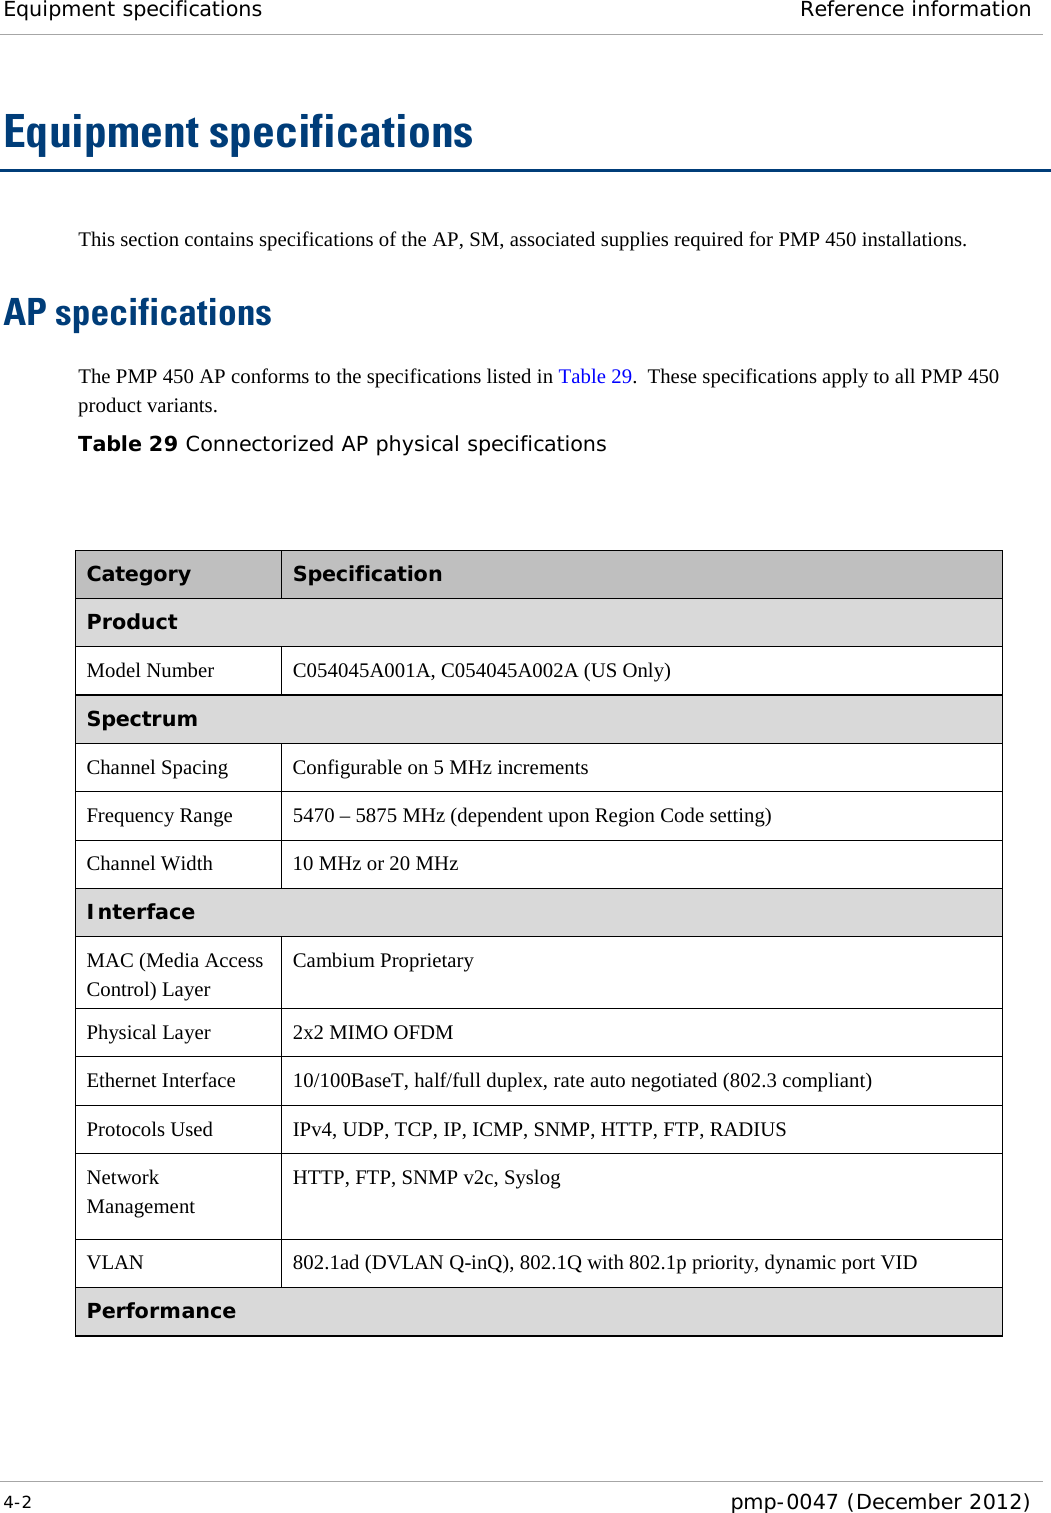 Equipment specifications Reference information  4-2  pmp-0047 (December 2012)  Equipment specifications This section contains specifications of the AP, SM, associated supplies required for PMP 450 installations. AP specifications The PMP 450 AP conforms to the specifications listed in Table 29.  These specifications apply to all PMP 450 product variants. Table 29 Connectorized AP physical specifications  Category  Specification Product Model Number C054045A001A, C054045A002A (US Only) Spectrum Channel Spacing Configurable on 5 MHz increments Frequency Range 5470 – 5875 MHz (dependent upon Region Code setting) Channel Width 10 MHz or 20 MHz Interface MAC (Media Access Control) Layer Cambium Proprietary Physical Layer 2x2 MIMO OFDM Ethernet Interface 10/100BaseT, half/full duplex, rate auto negotiated (802.3 compliant) Protocols Used IPv4, UDP, TCP, IP, ICMP, SNMP, HTTP, FTP, RADIUS Network Management HTTP, FTP, SNMP v2c, Syslog VLAN 802.1ad (DVLAN Q-inQ), 802.1Q with 802.1p priority, dynamic port VID Performance 